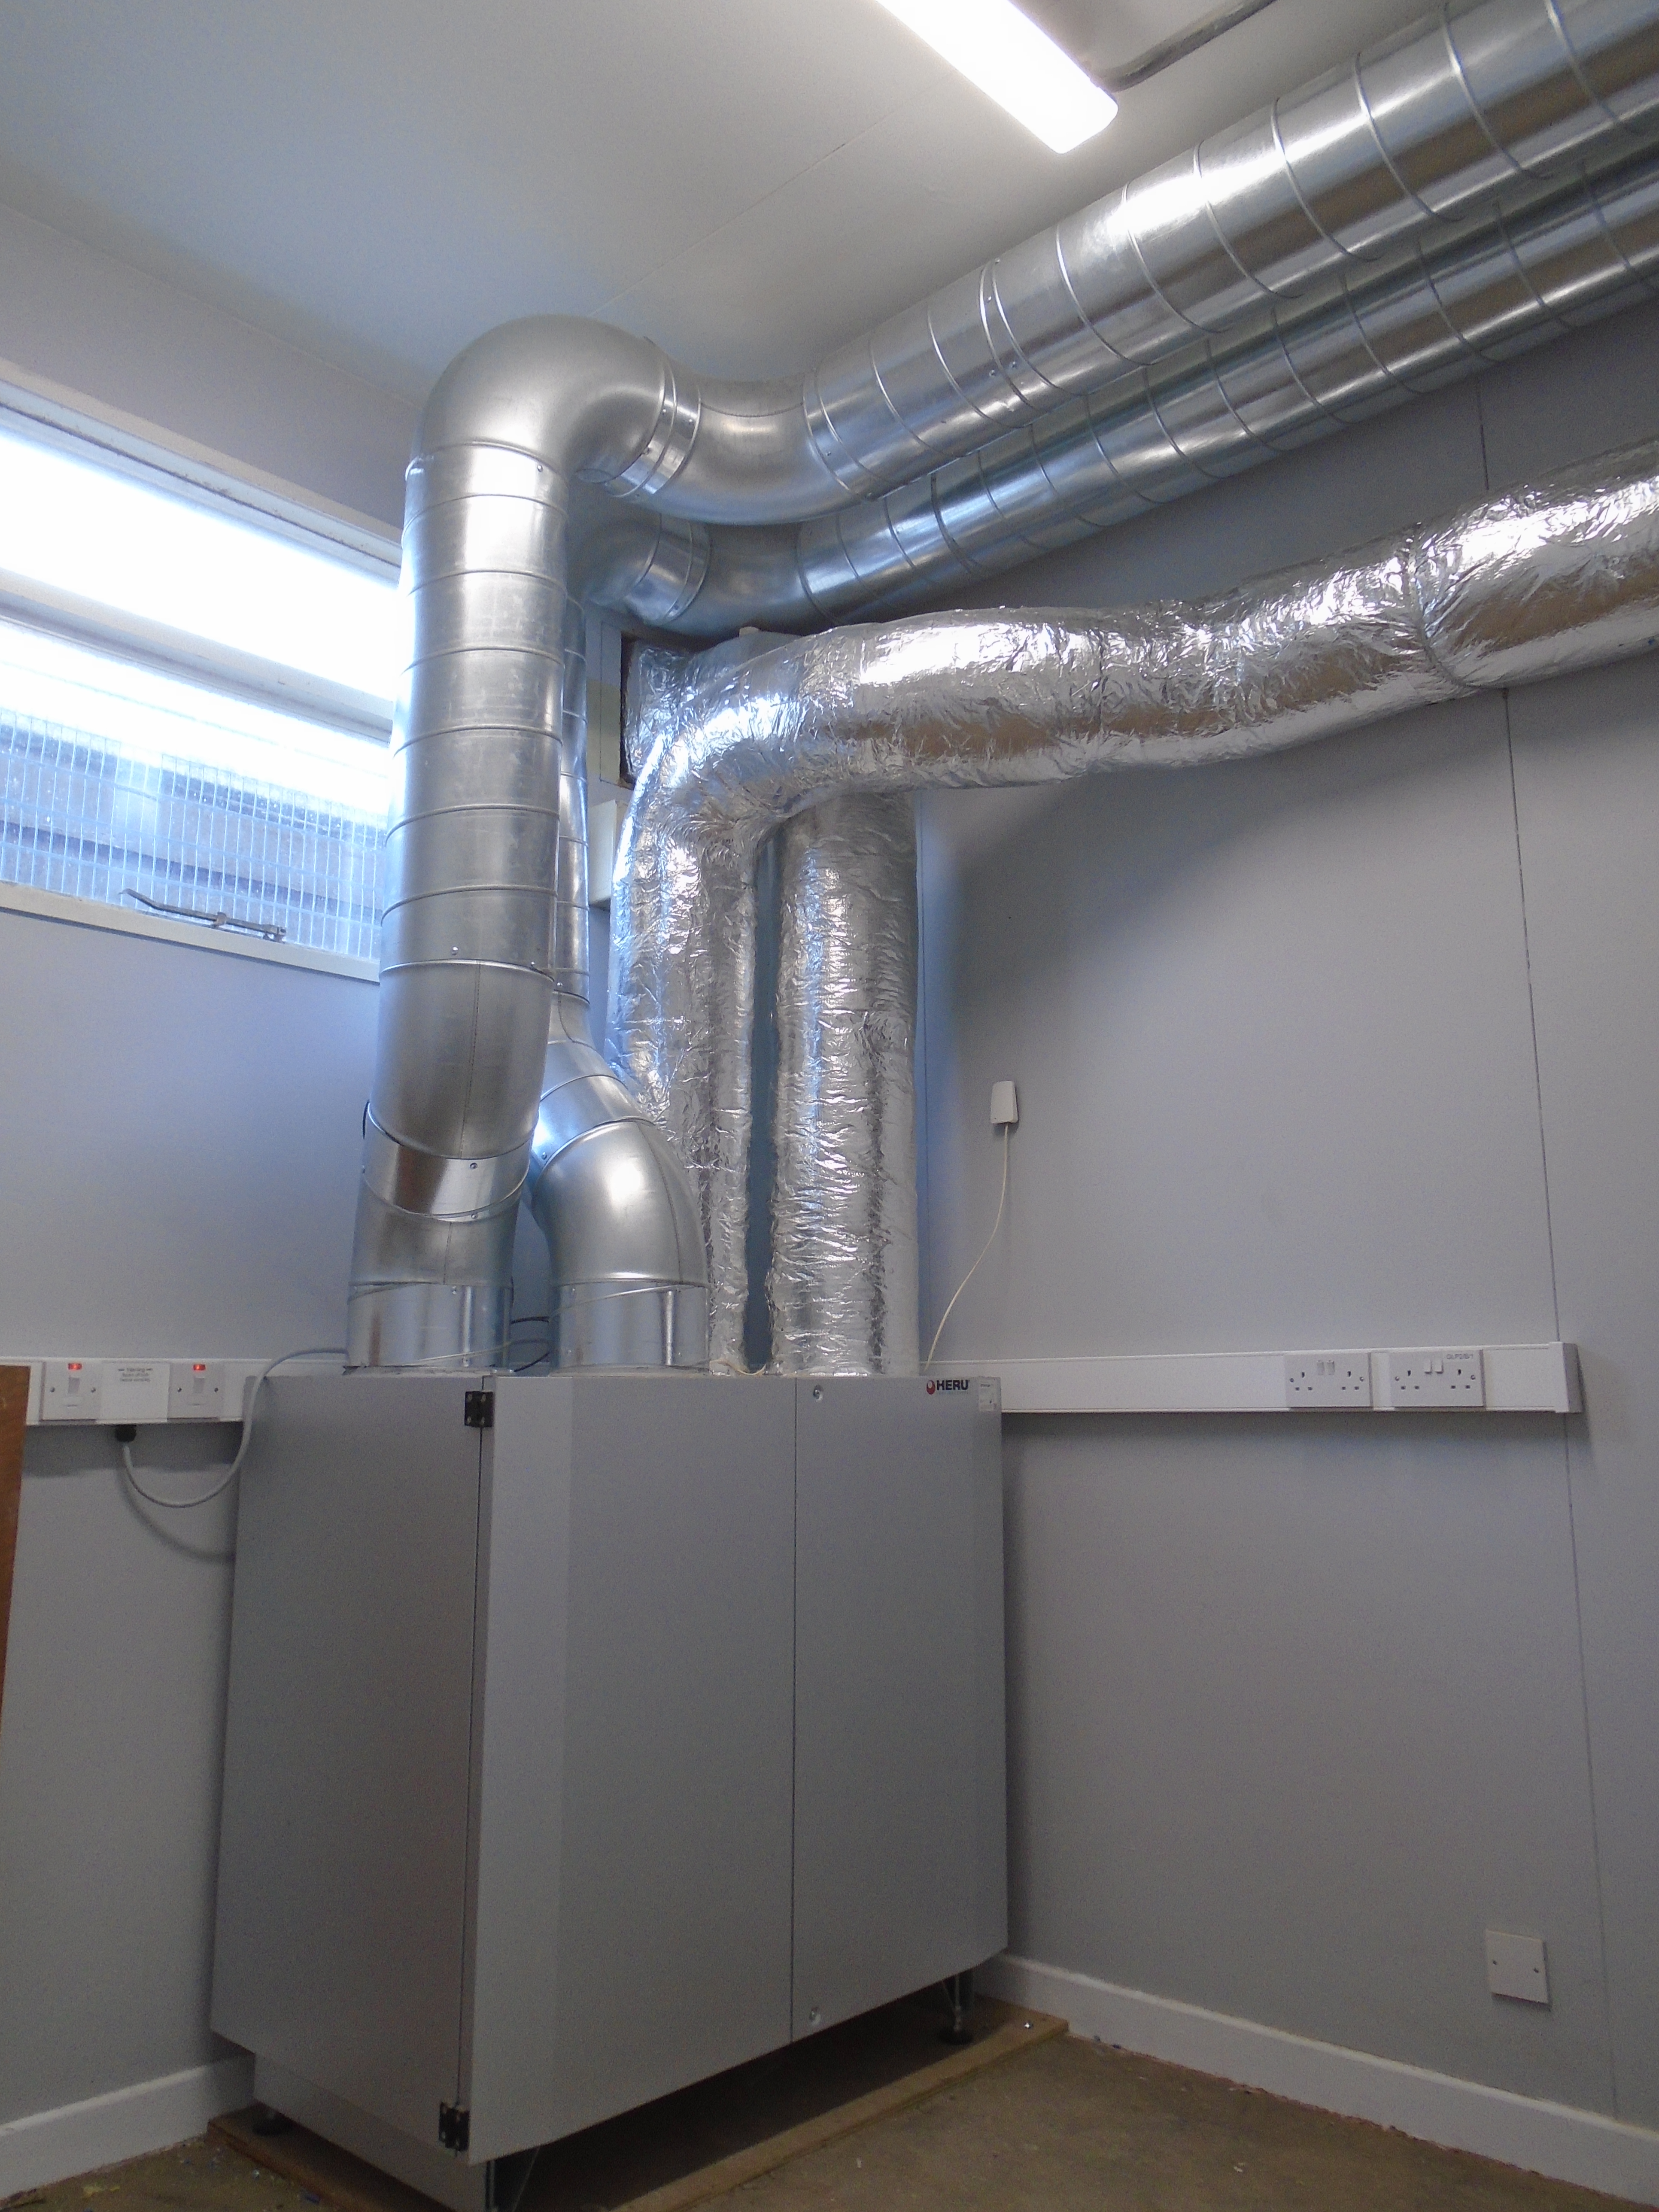 Beam MVHR unit with insulated ductwork running along laboratory ceiling